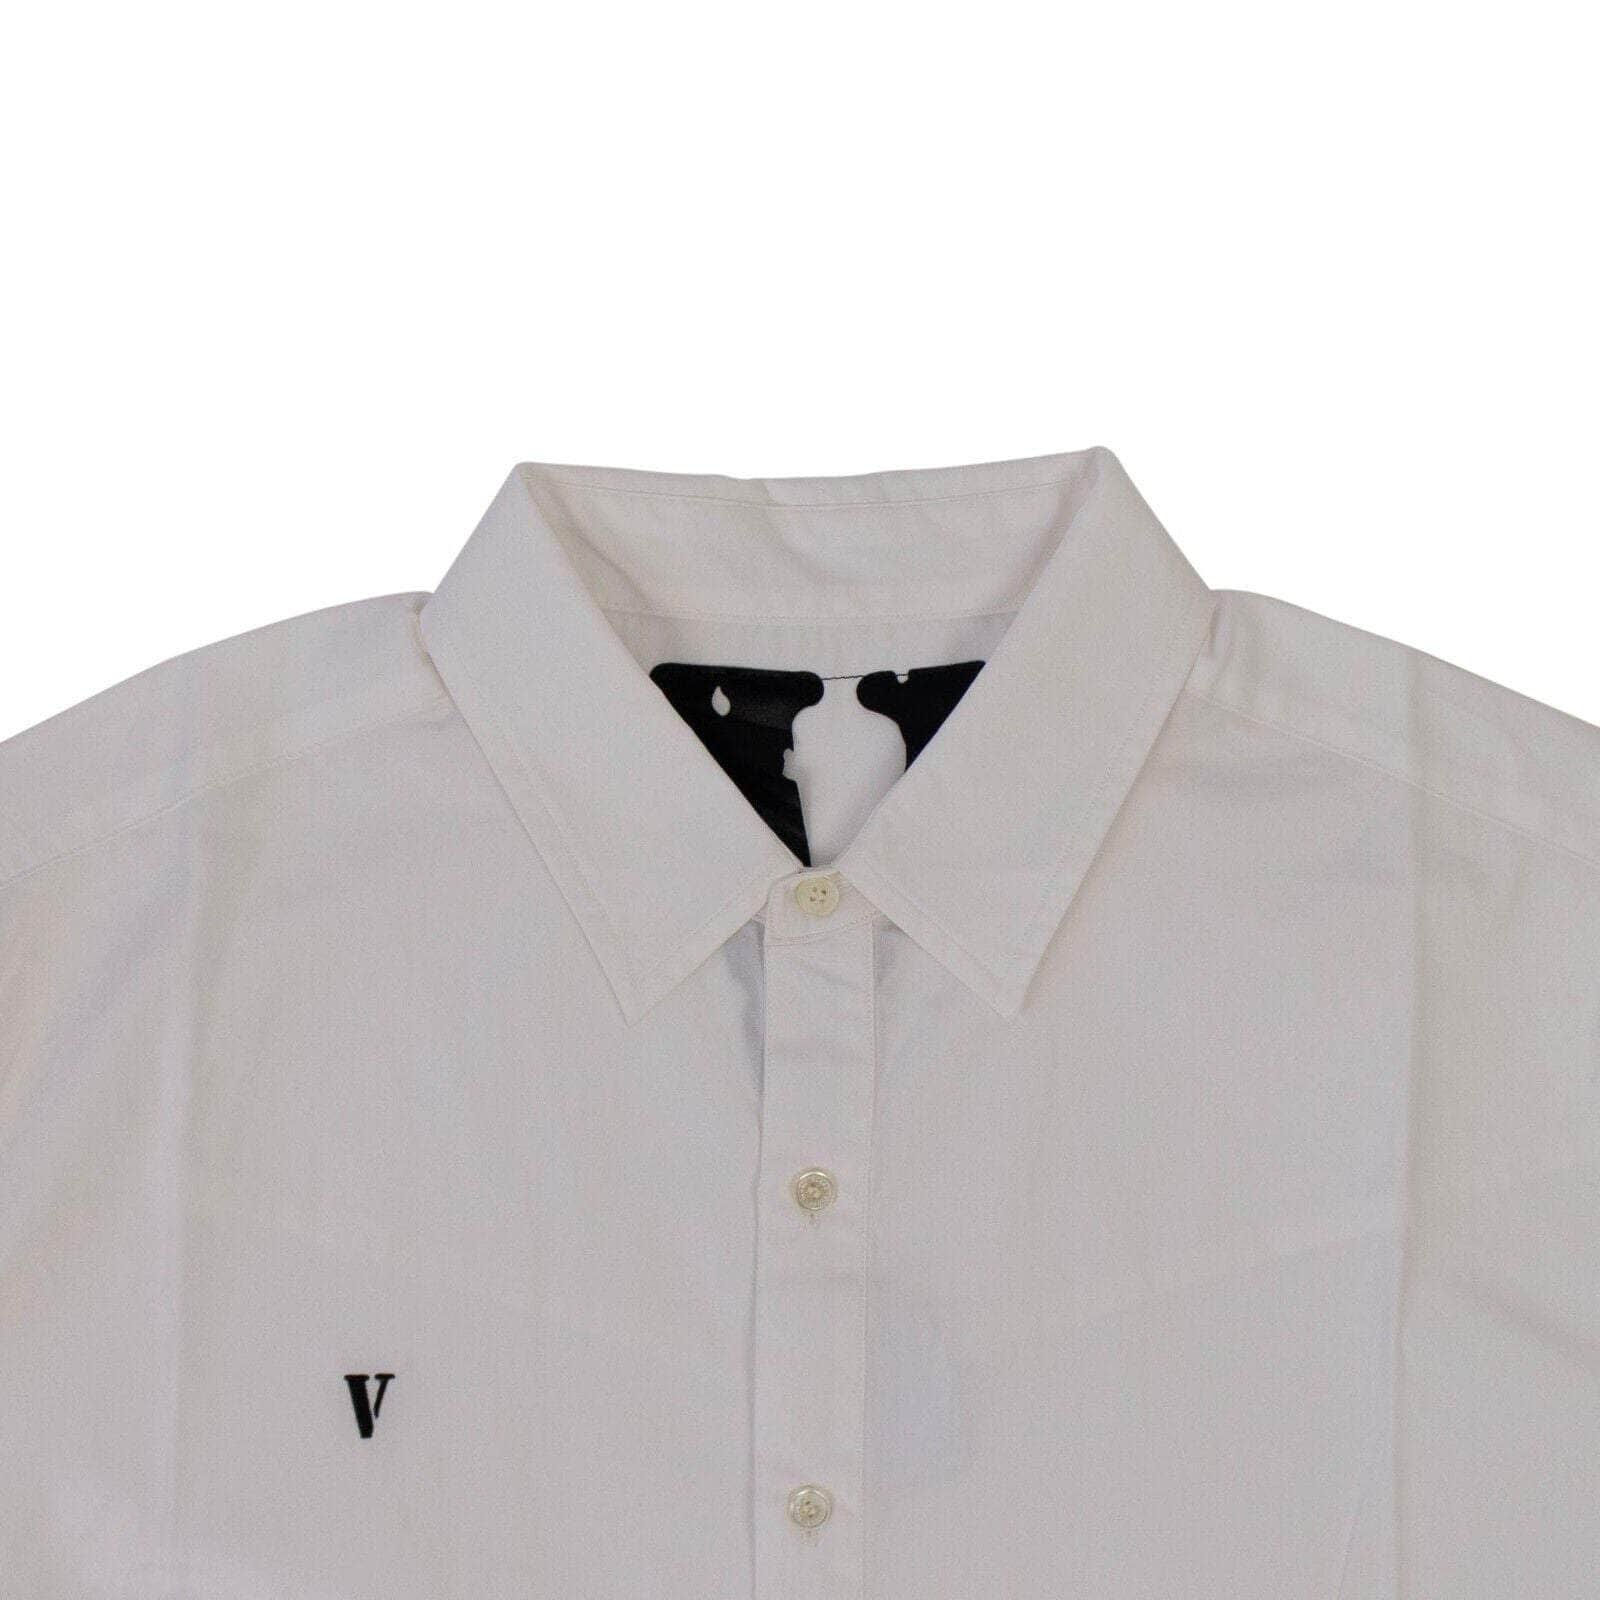 Vlone channelenable-all, chicmi, couponcollection, gender-mens, main-clothing, mens-shoes, shop375, under-250, vlone 2XL White & Black V Long Sleeve Button Down Shirt 72V-29/2XL 72V-29/2XL